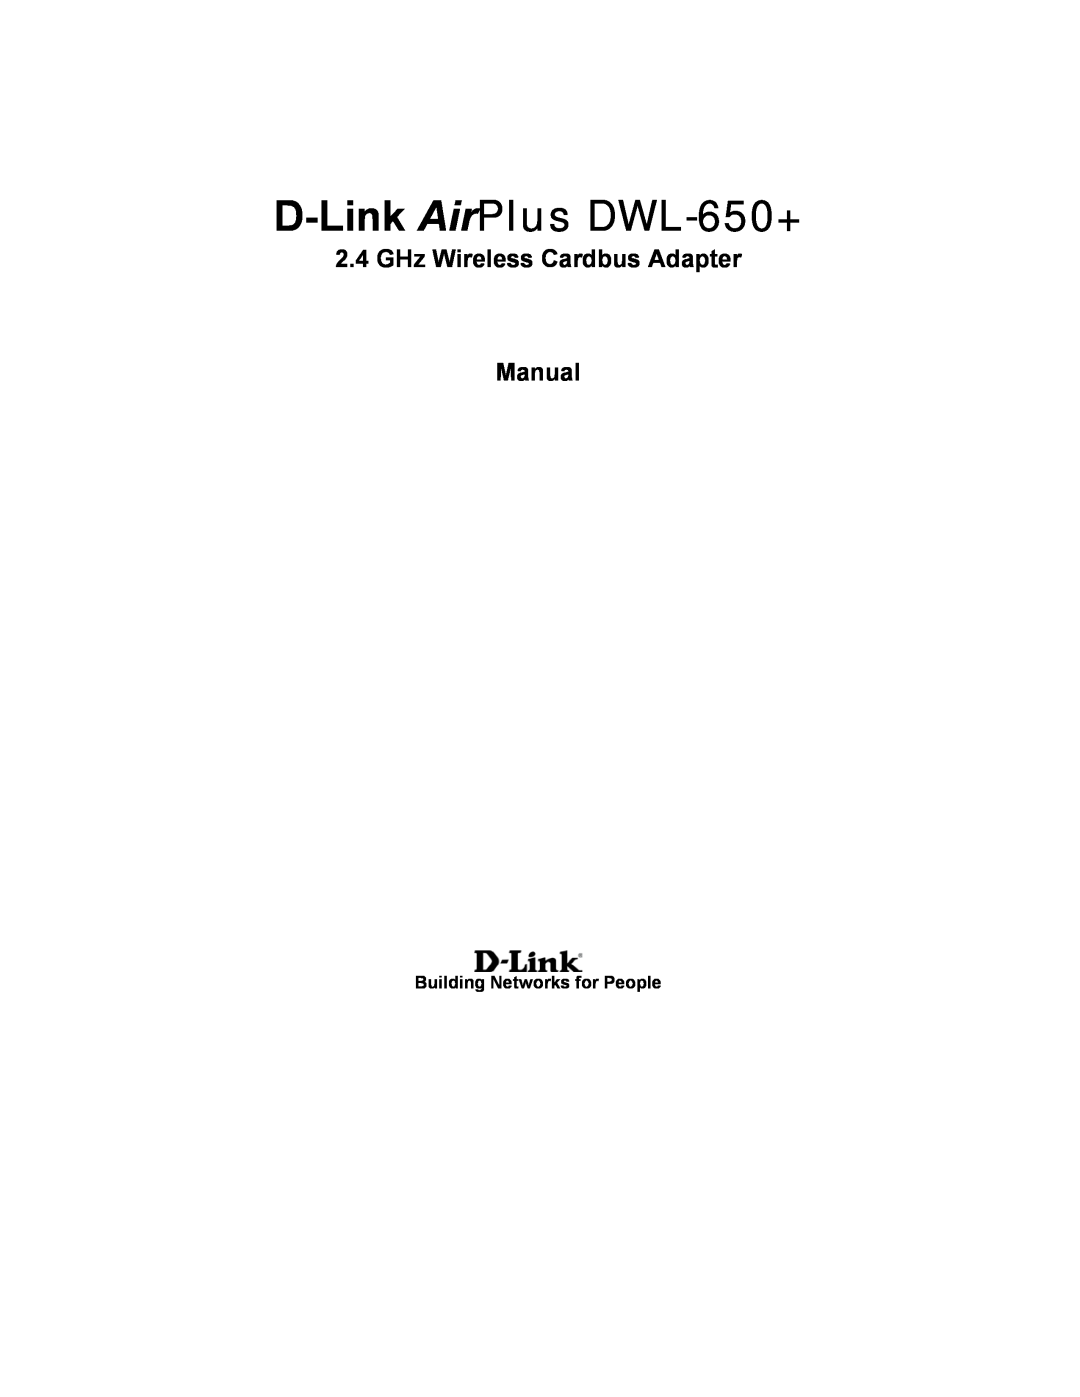 D-Link manual GHz Wireless Cardbus Adapter Manual, D-Link AirPlus DWL-650+, Building Networks for People 